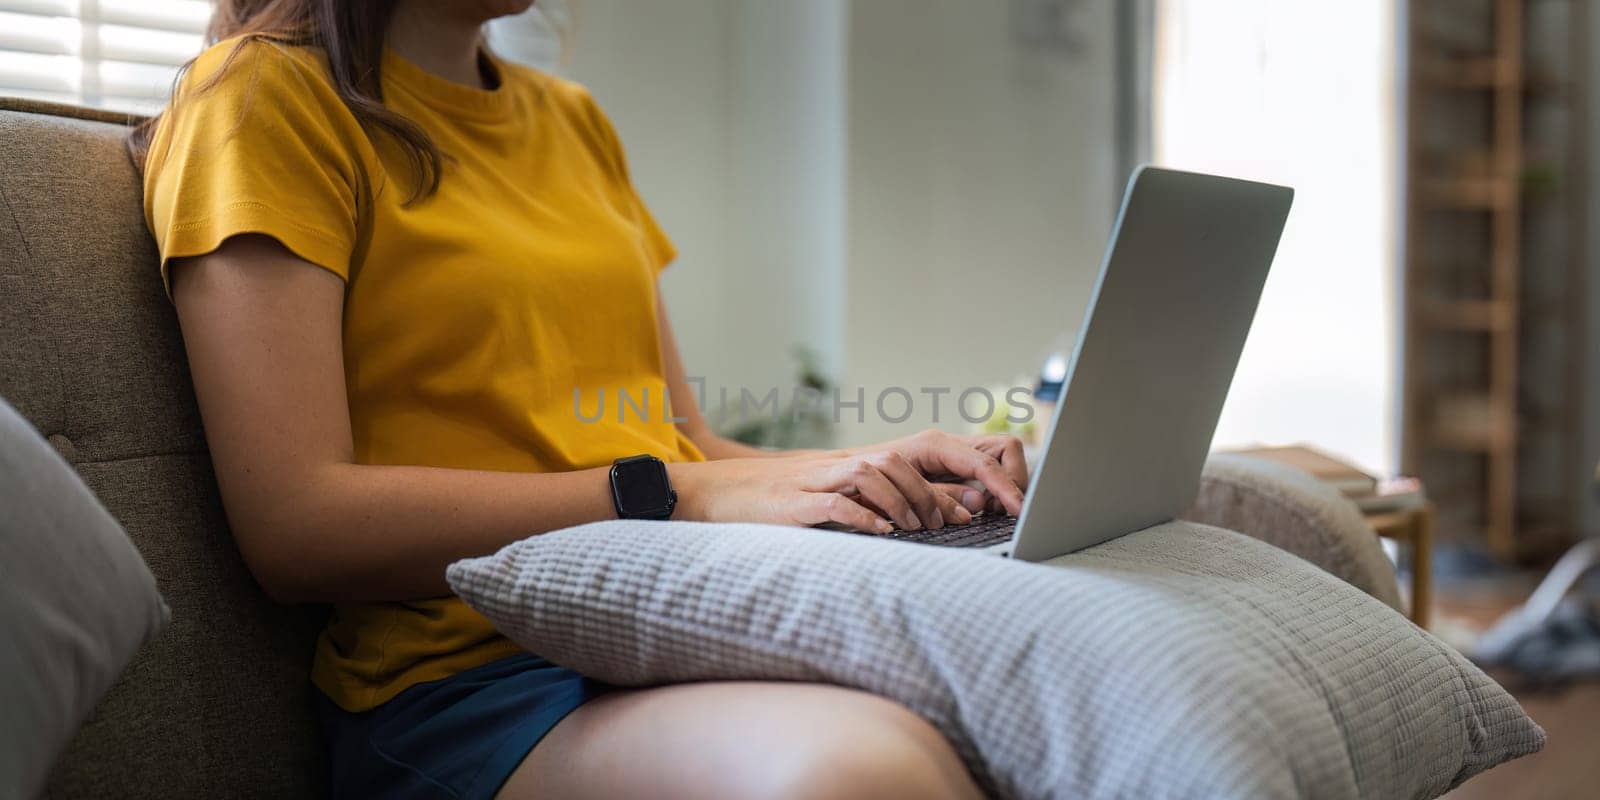 Young woman Asian using laptop pc computer on couch relax surfing the internet at home. lifestyle relaxation concept by nateemee